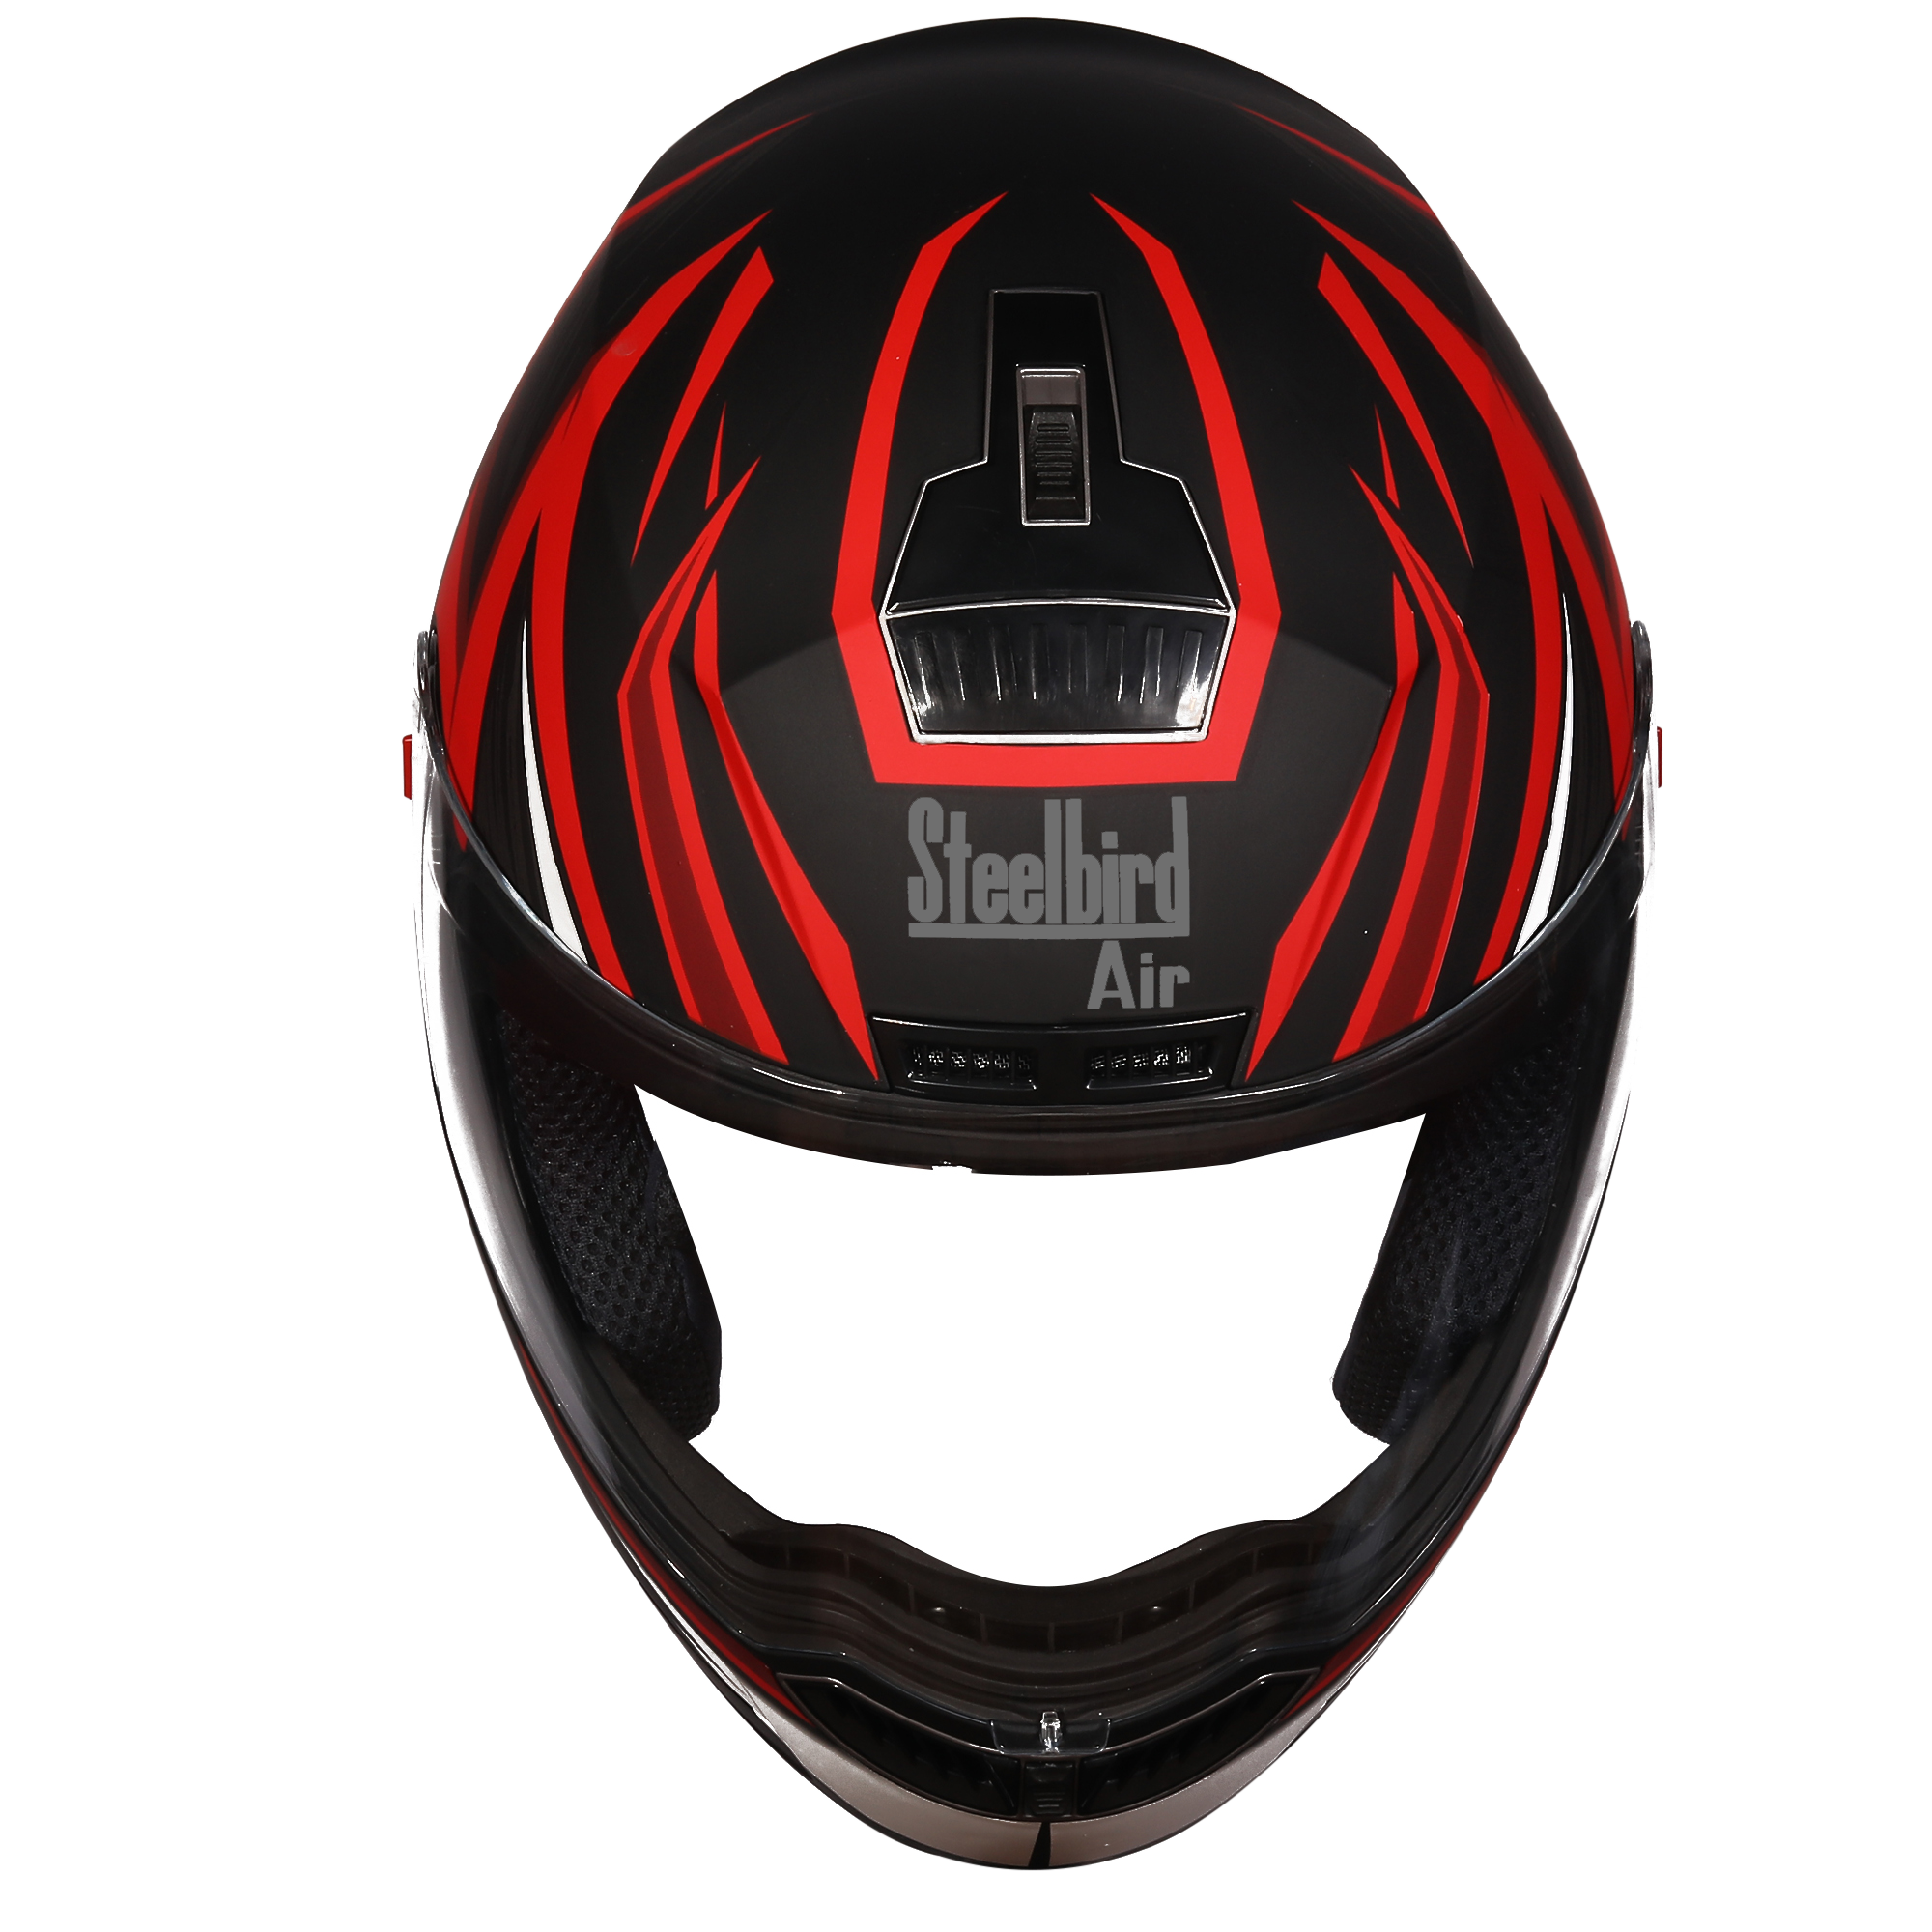 SBA-1 THRYL Mat Black With Red ( Fitted With Clear Visor Extra Gold Night Vision Visor Free)